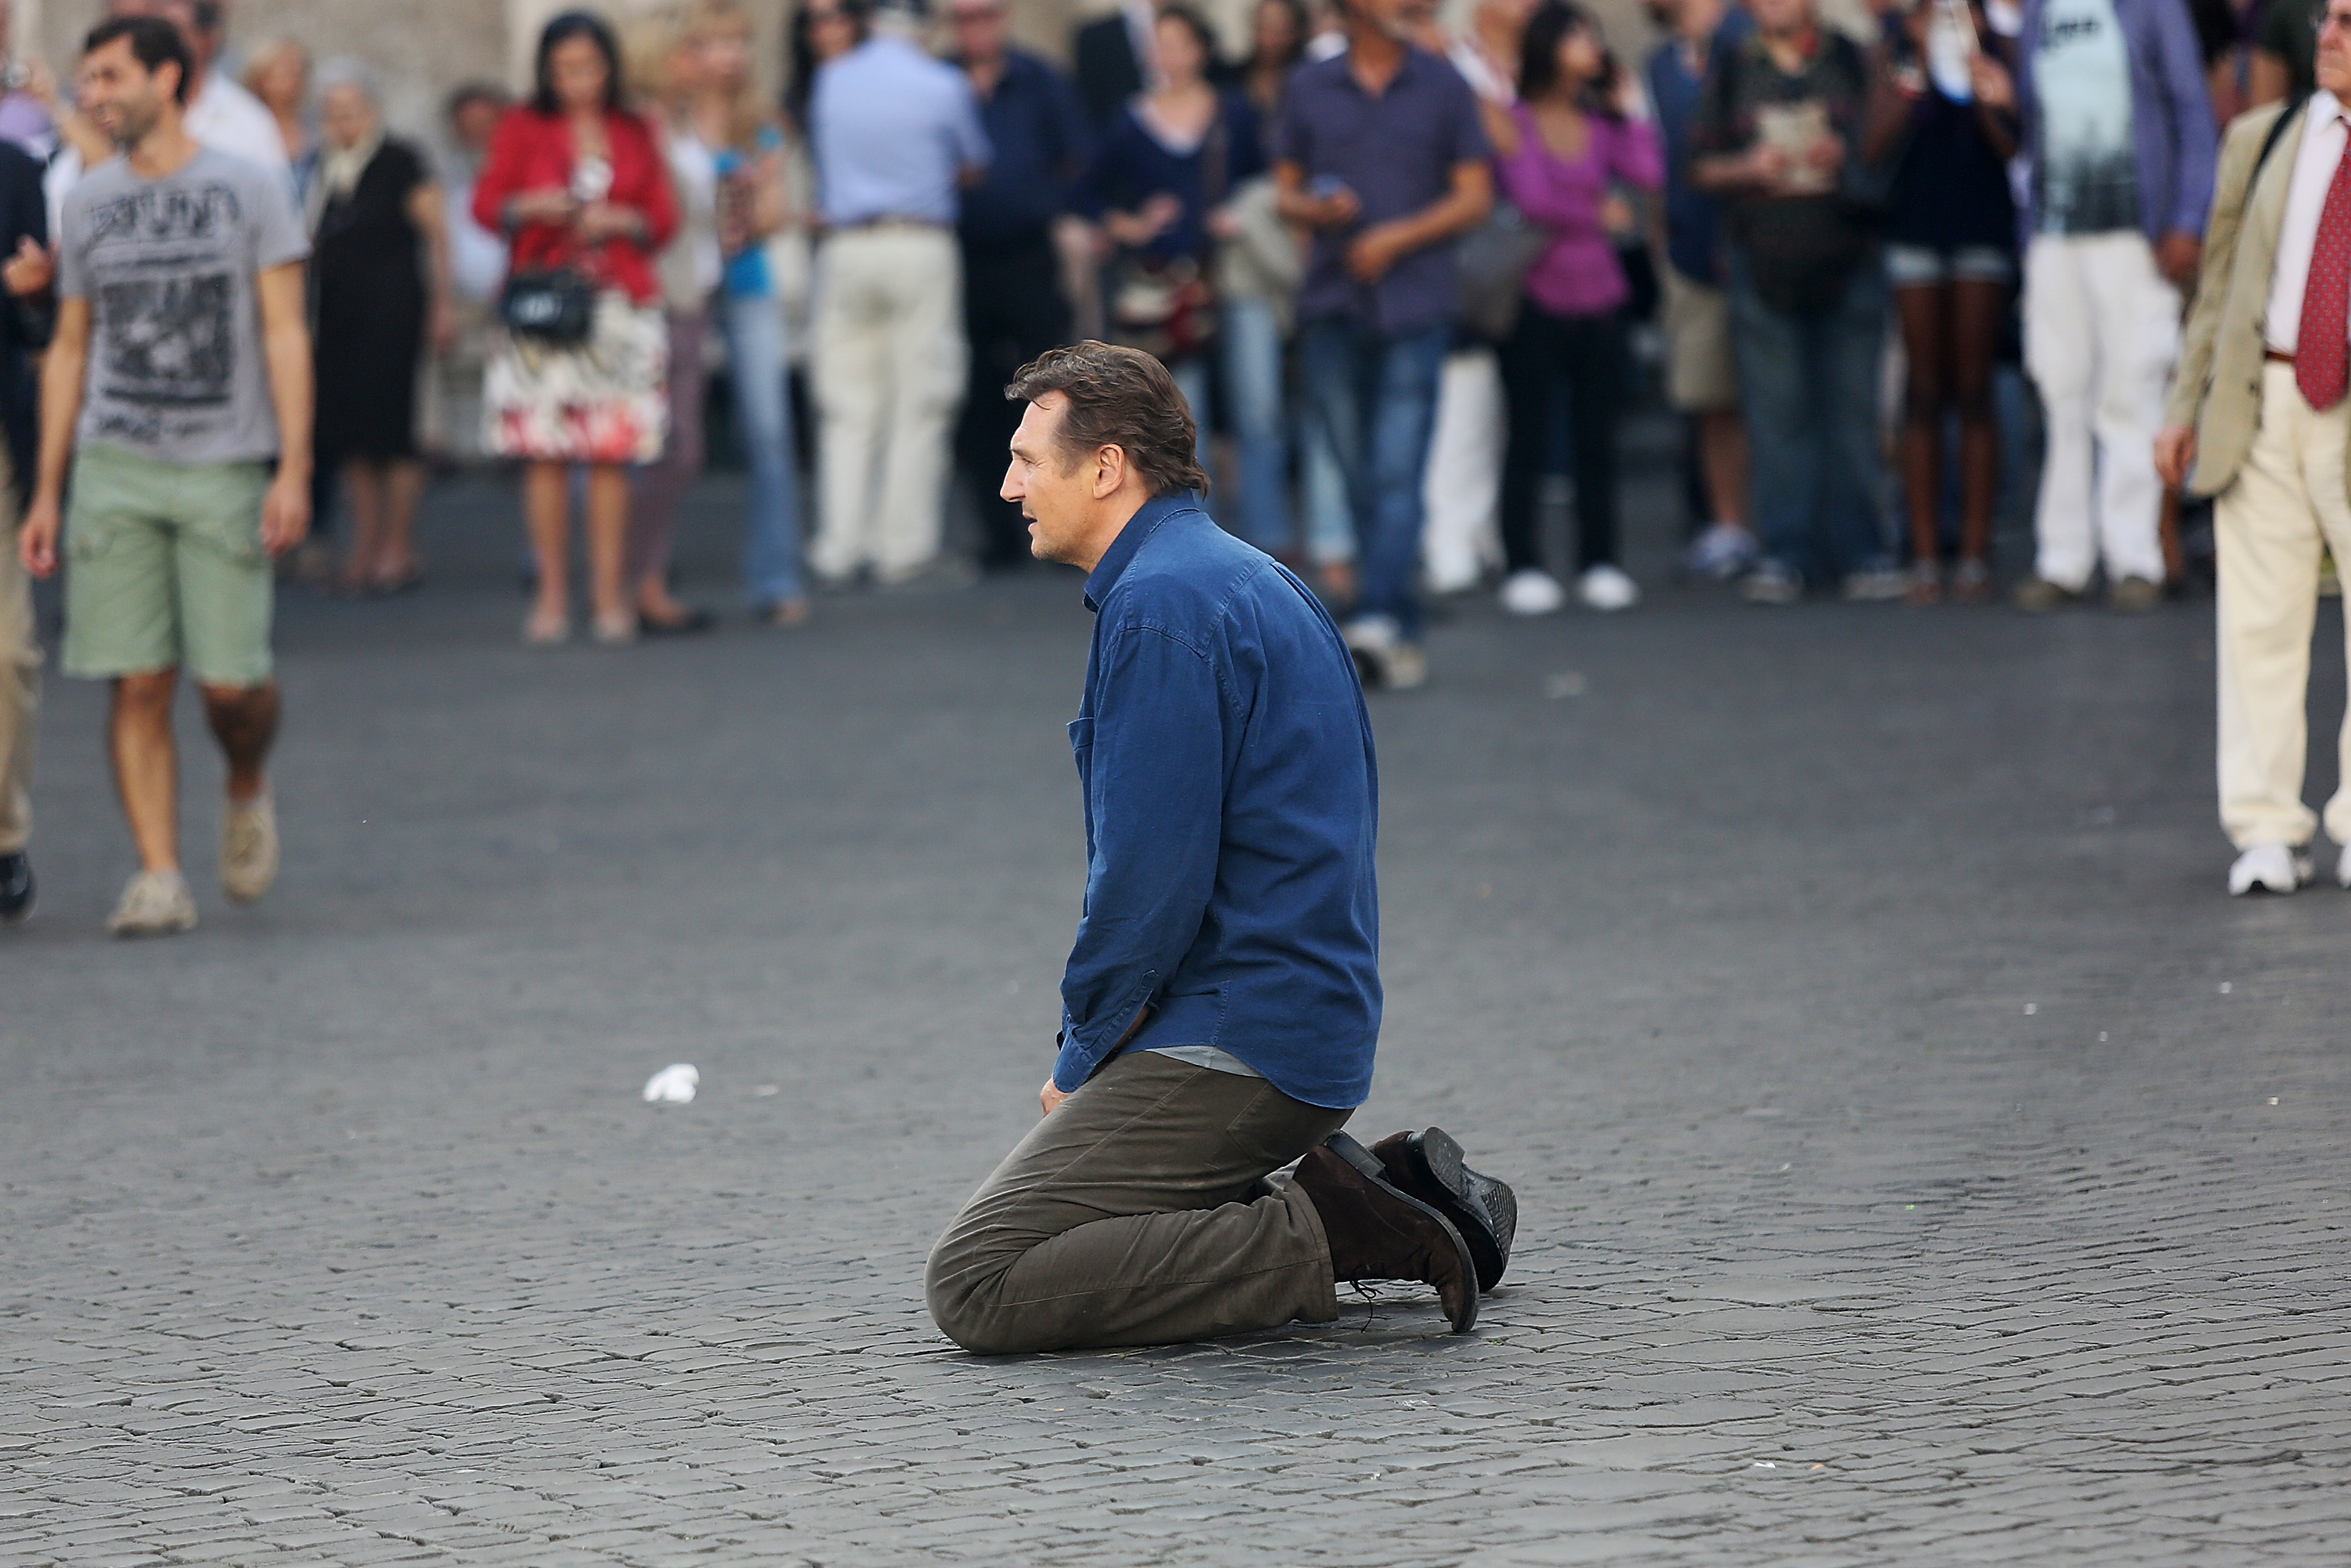 Liam Neeson on October 22, 2012 in Rome, Italy | Source: Getty Images